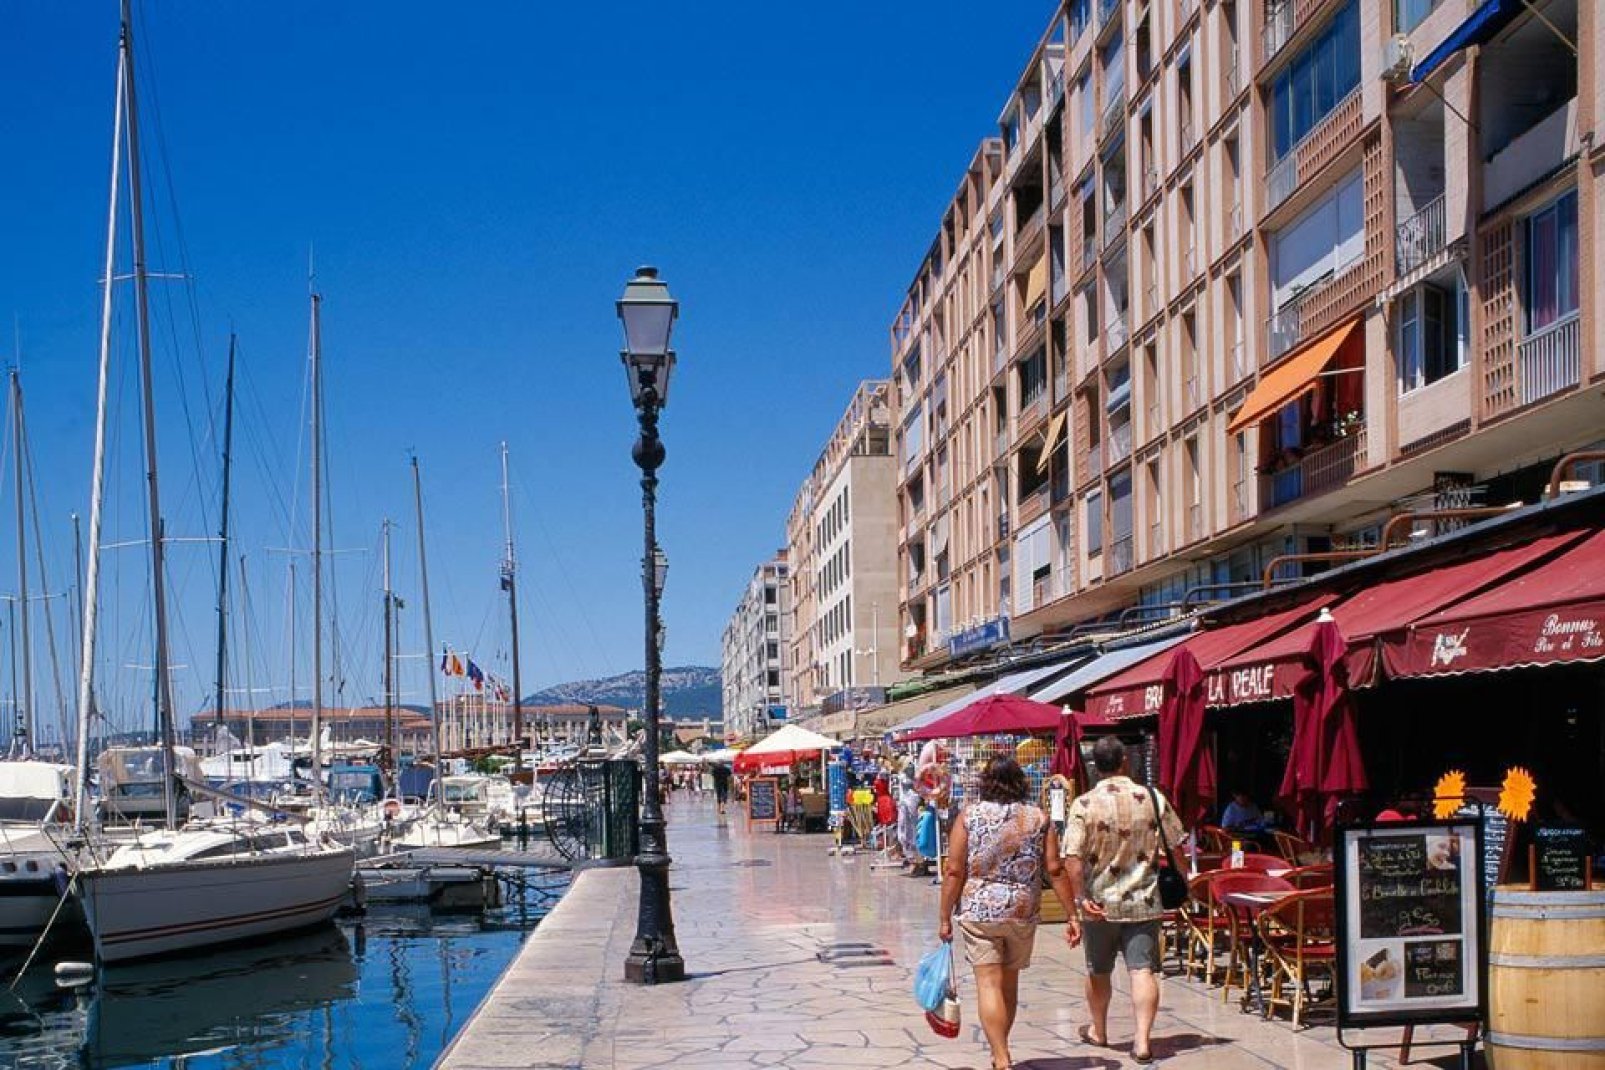 Toulon's restaurants propose local specialties. Come to taste courgette flower fritters, 'bagna cauda' or 'daube', a Provençal stew, under the Toulon sun.